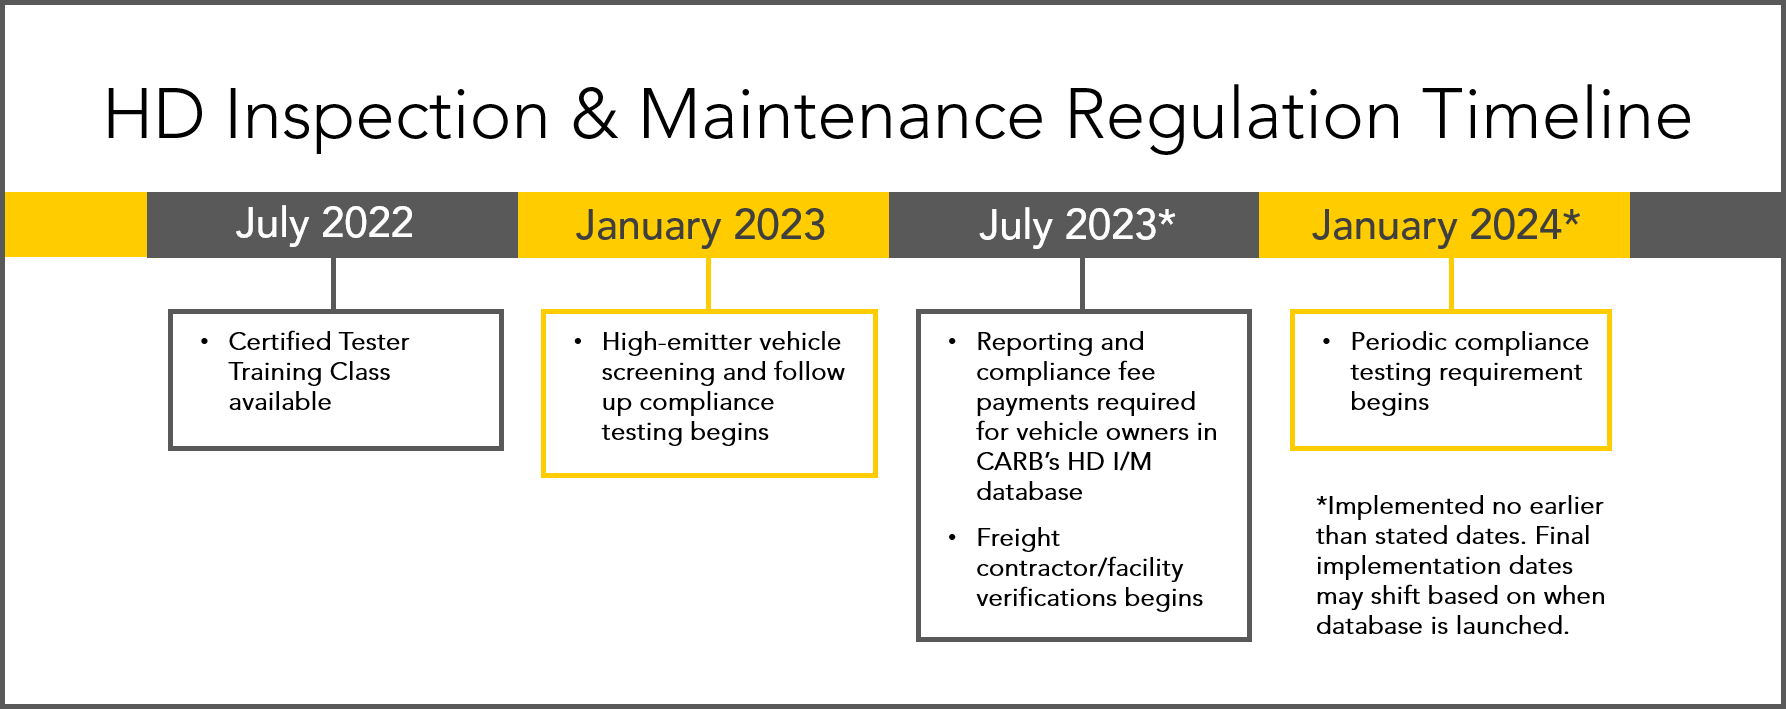 HD Inspection & Maintenance Regulation Timeline. In mid 2022 Certified tester training class will be available. January 2023 - Phase 1 - Reporting required for initial owner and vehicle information in CARB's HD I/M database. High-emitter vehicle screening and follow up compliance testing begins. July 2023 - Phase 2 - Compliance checked during California DMV registration. CHP/CARB Begin enforcing compliance certificate requirement. Freight contractor/facility verification begins. January 2024 - Phase 3 - Full implementation. Periodic compliance testing requirement begins.